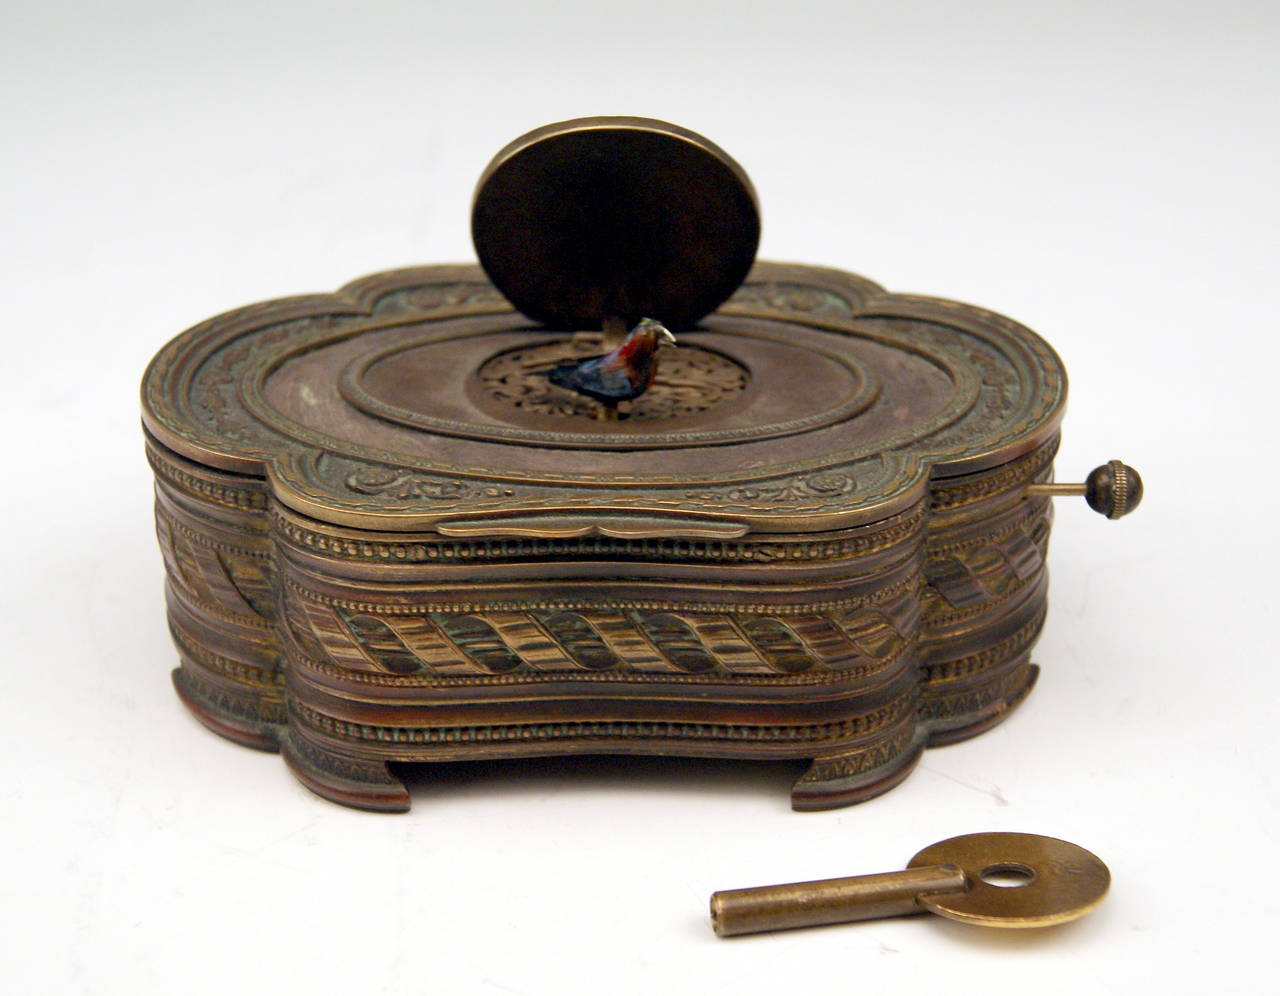 We're presenting here a very rare Automate of Singing Bird / Songbird, made in Vienna  (circa 1915 - 20). 
 The oval casket made of brass is shaped in following manner: Its edges are of wavy form type. The lid as well as its outer walls are